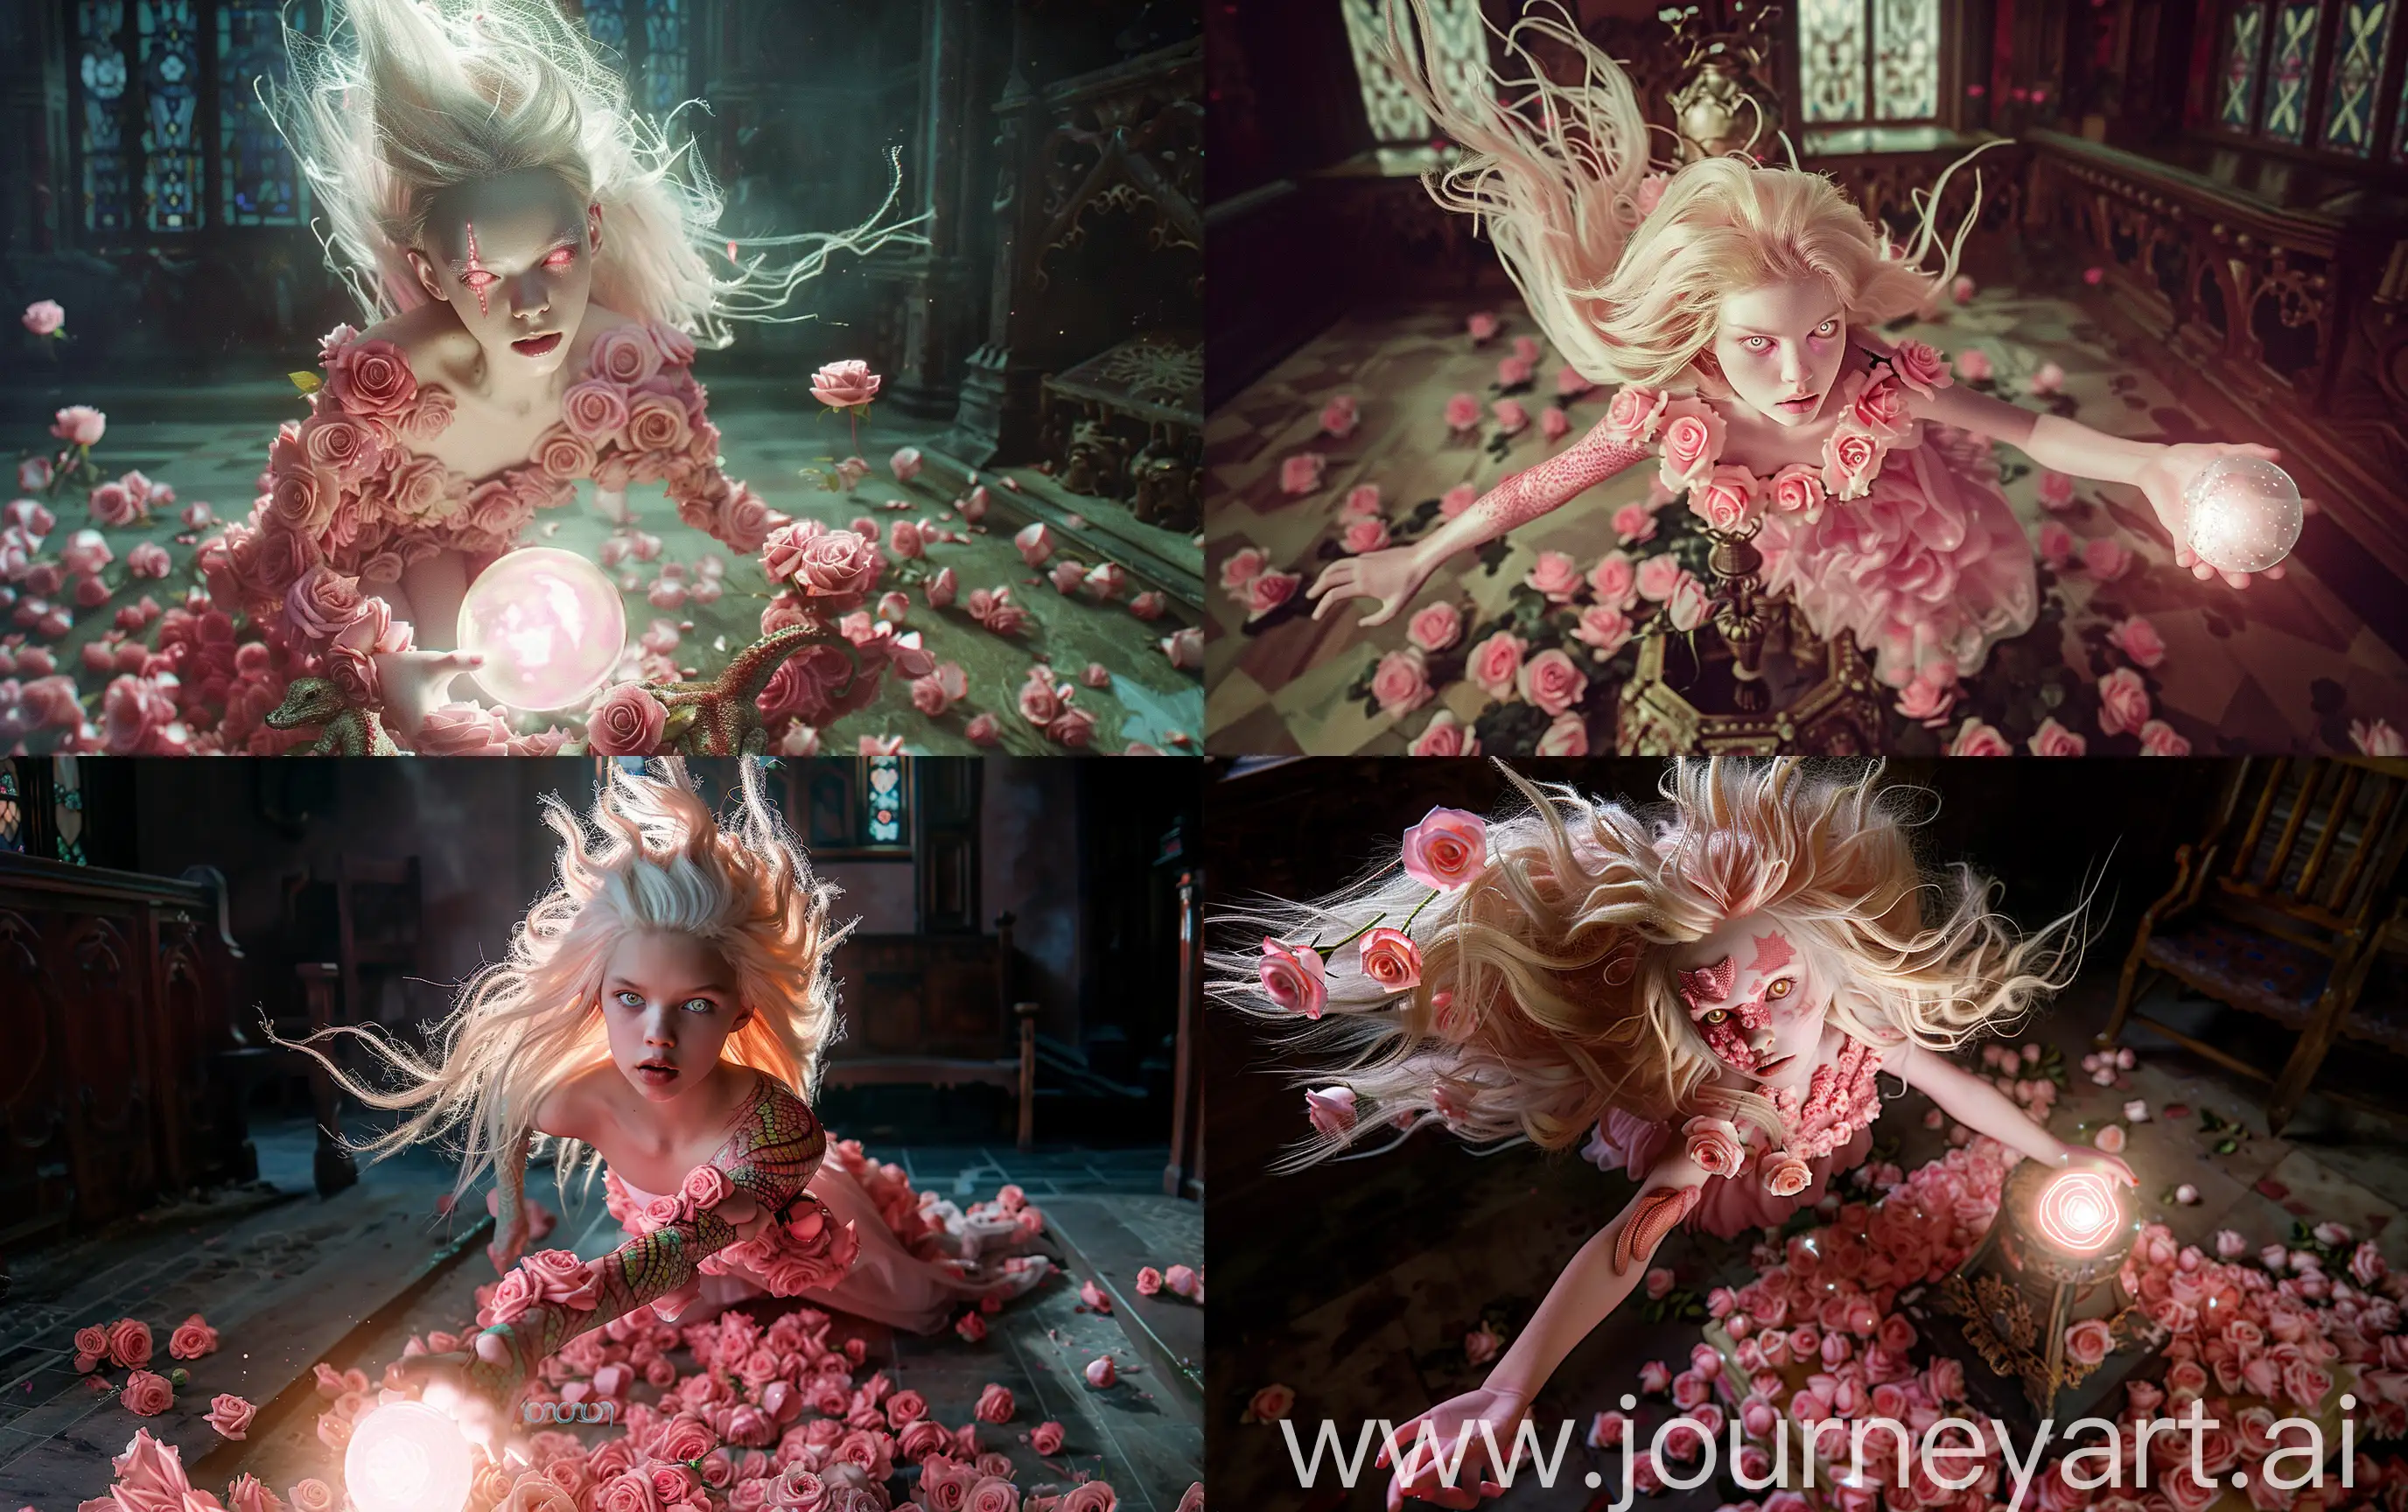 young female model with blond rosen wild hair, her body consists of pink roses partially, she has reptile eyes, she wears a pink dress, she holds a glowing ball in her hand, She descends in flight to the floor where there is an altar strewn with roses, The floor is strewn with roses, mystical dark background, cinematic, canon 18mm shot, realistic --ar 16:10